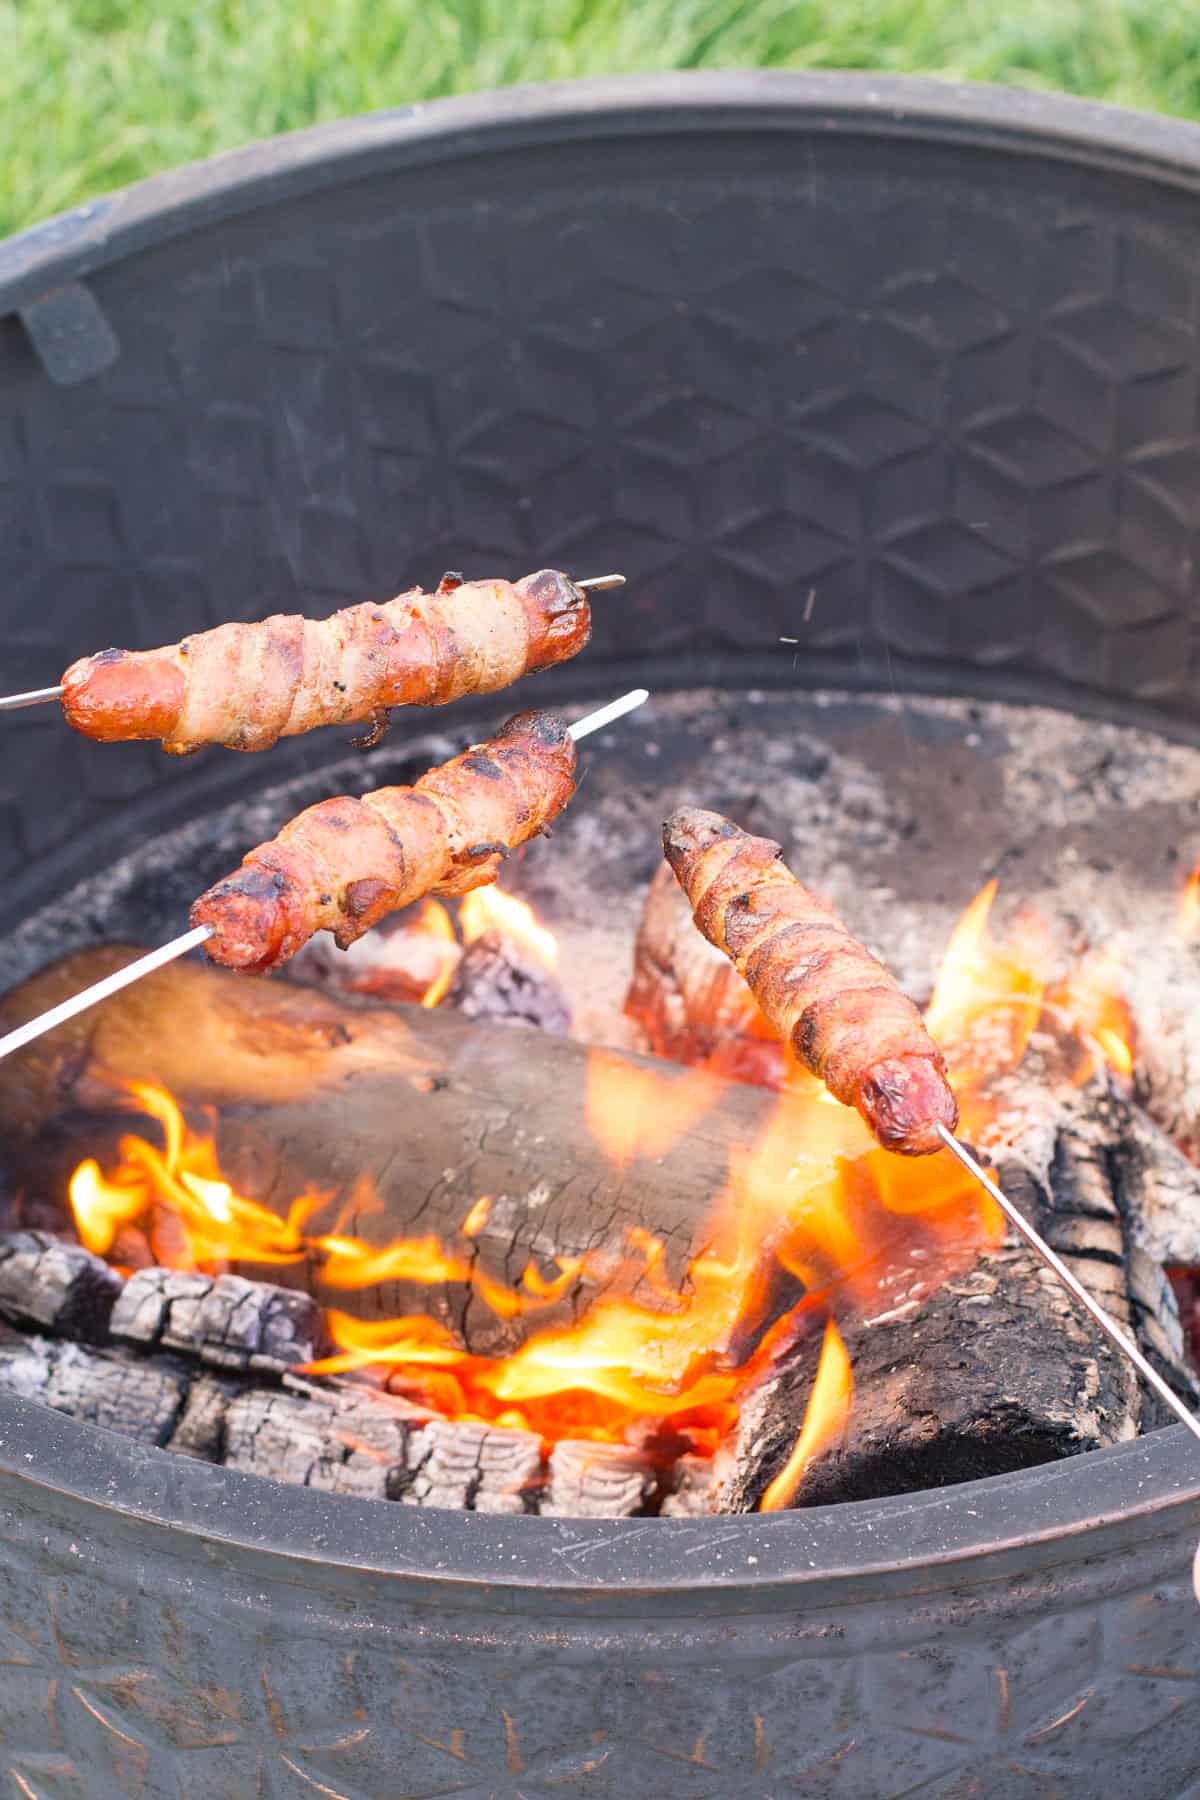 A fire pit with 3 metal skewers roasting bacon wrapped hot dogs!